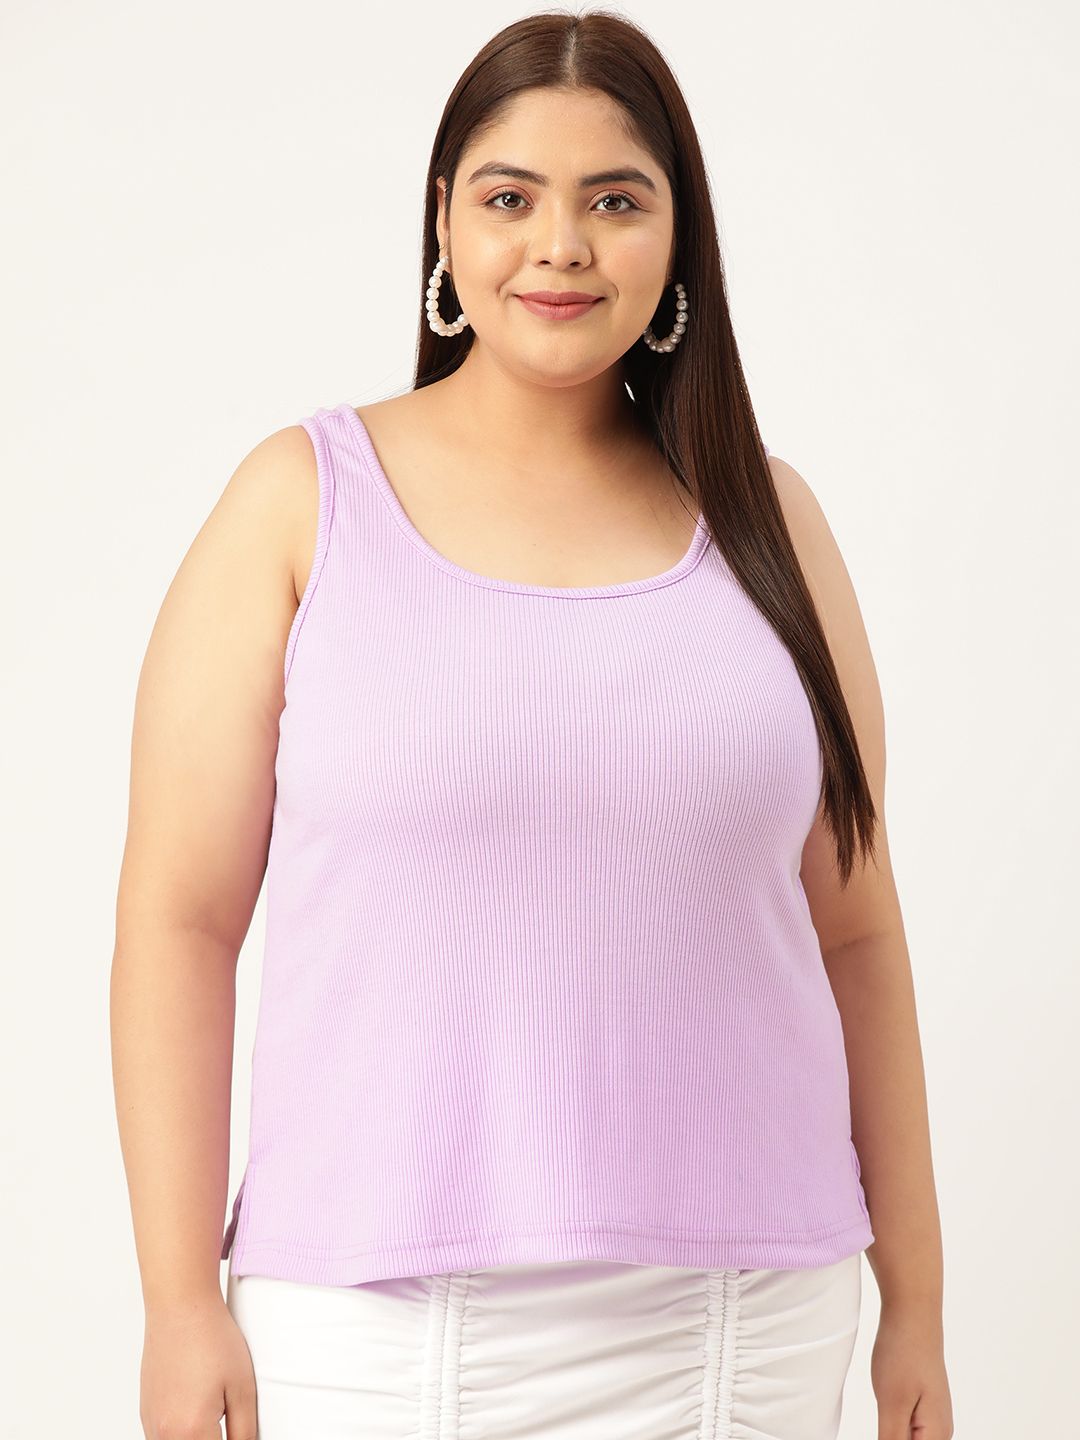 Buy theRebelinme Plus Size Womens Black Solid Camisole Top online